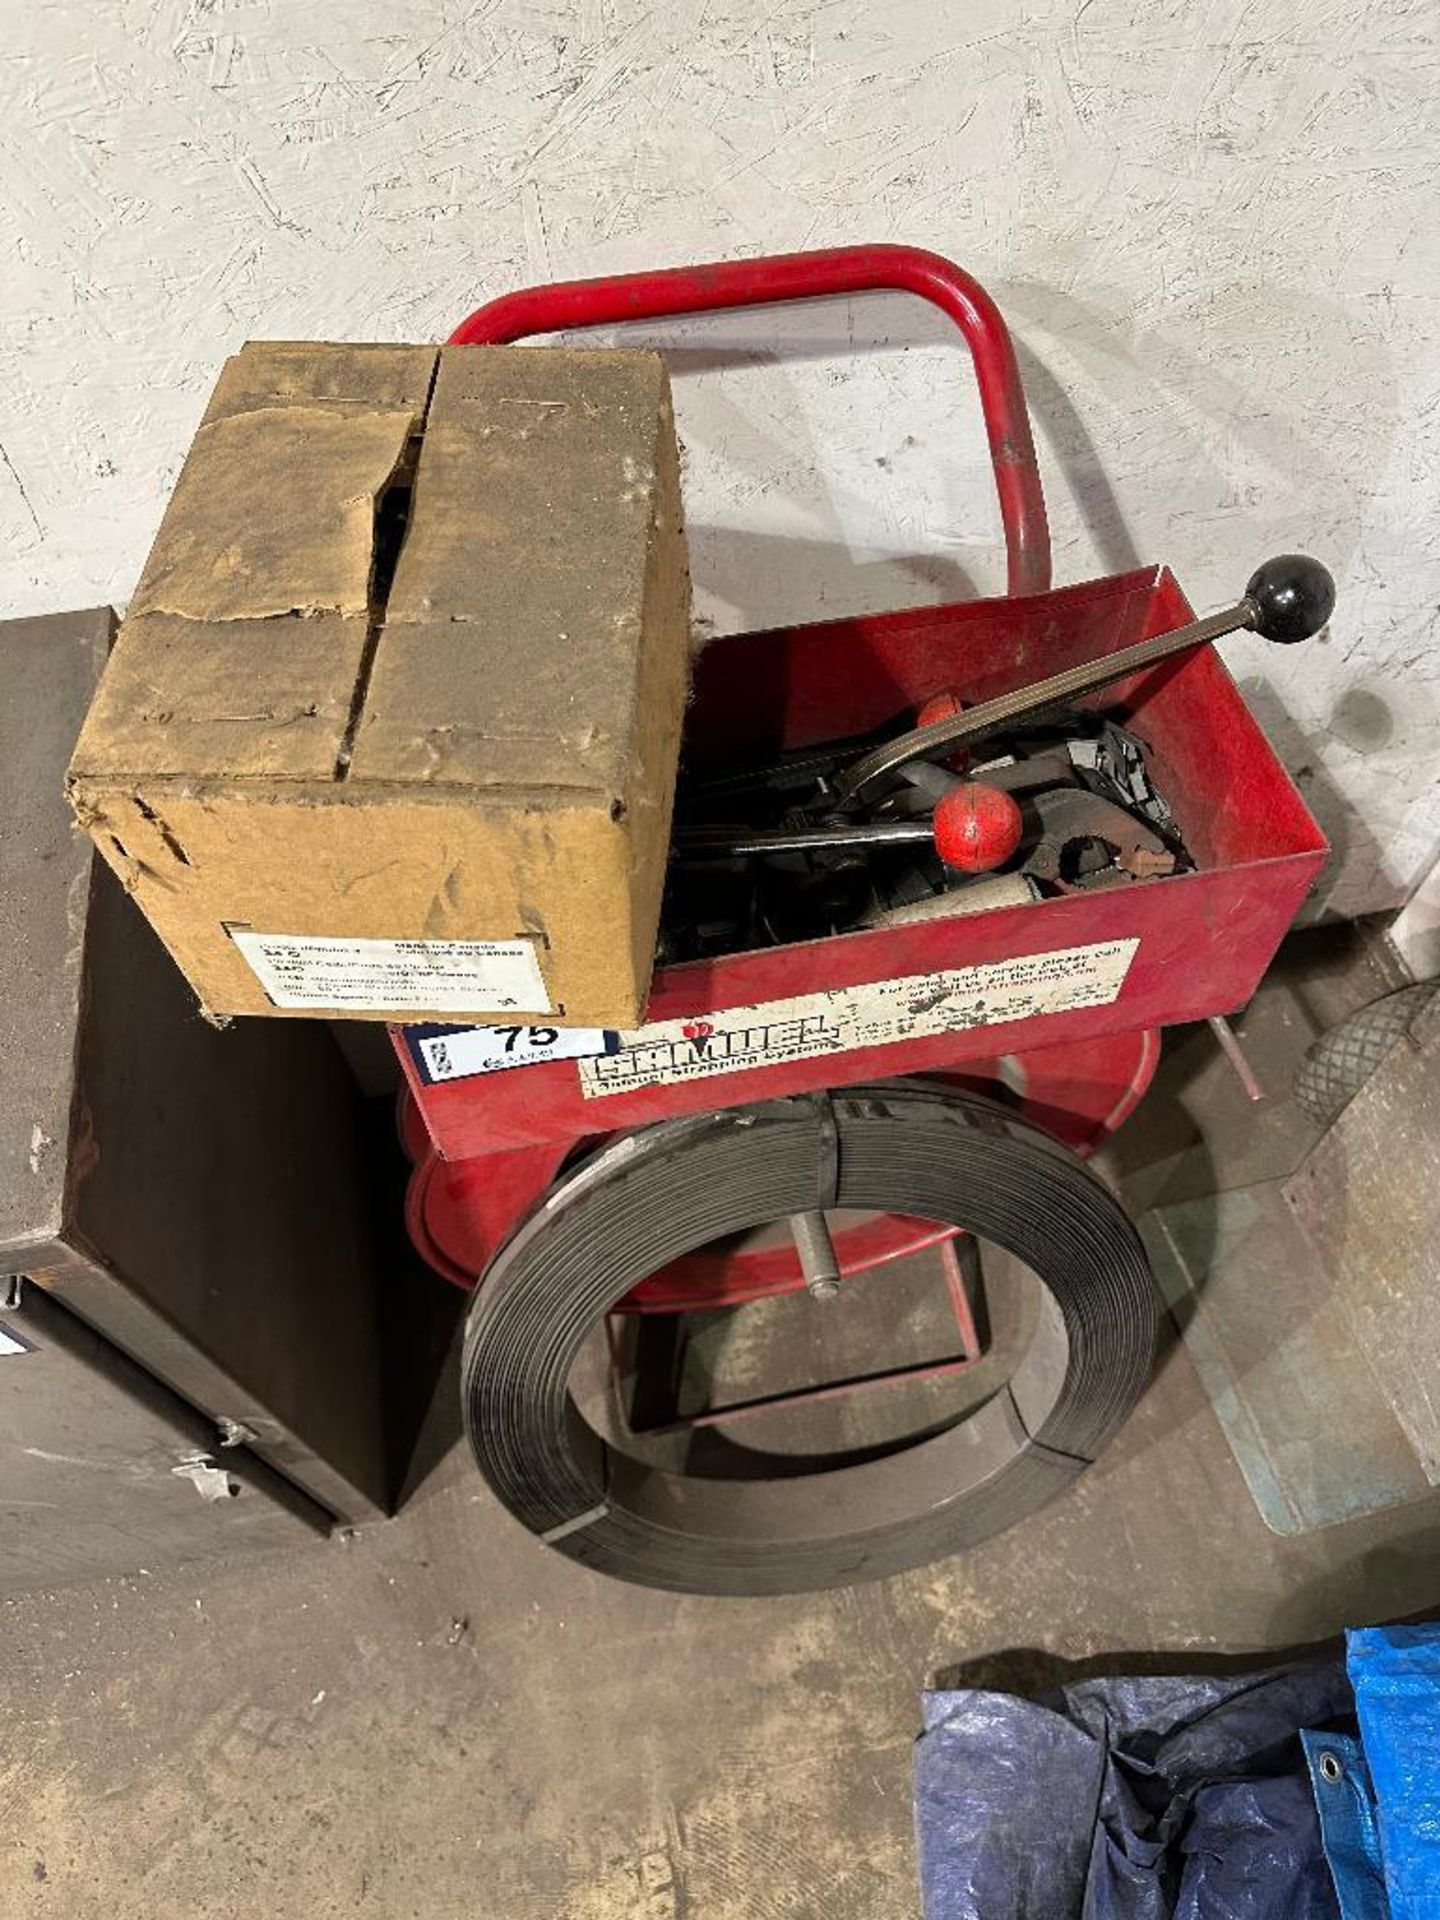 Steel Banding Cart w/ Tensioner, Crimper, Box of Clips, Steel Strapping, etc. - Image 2 of 4